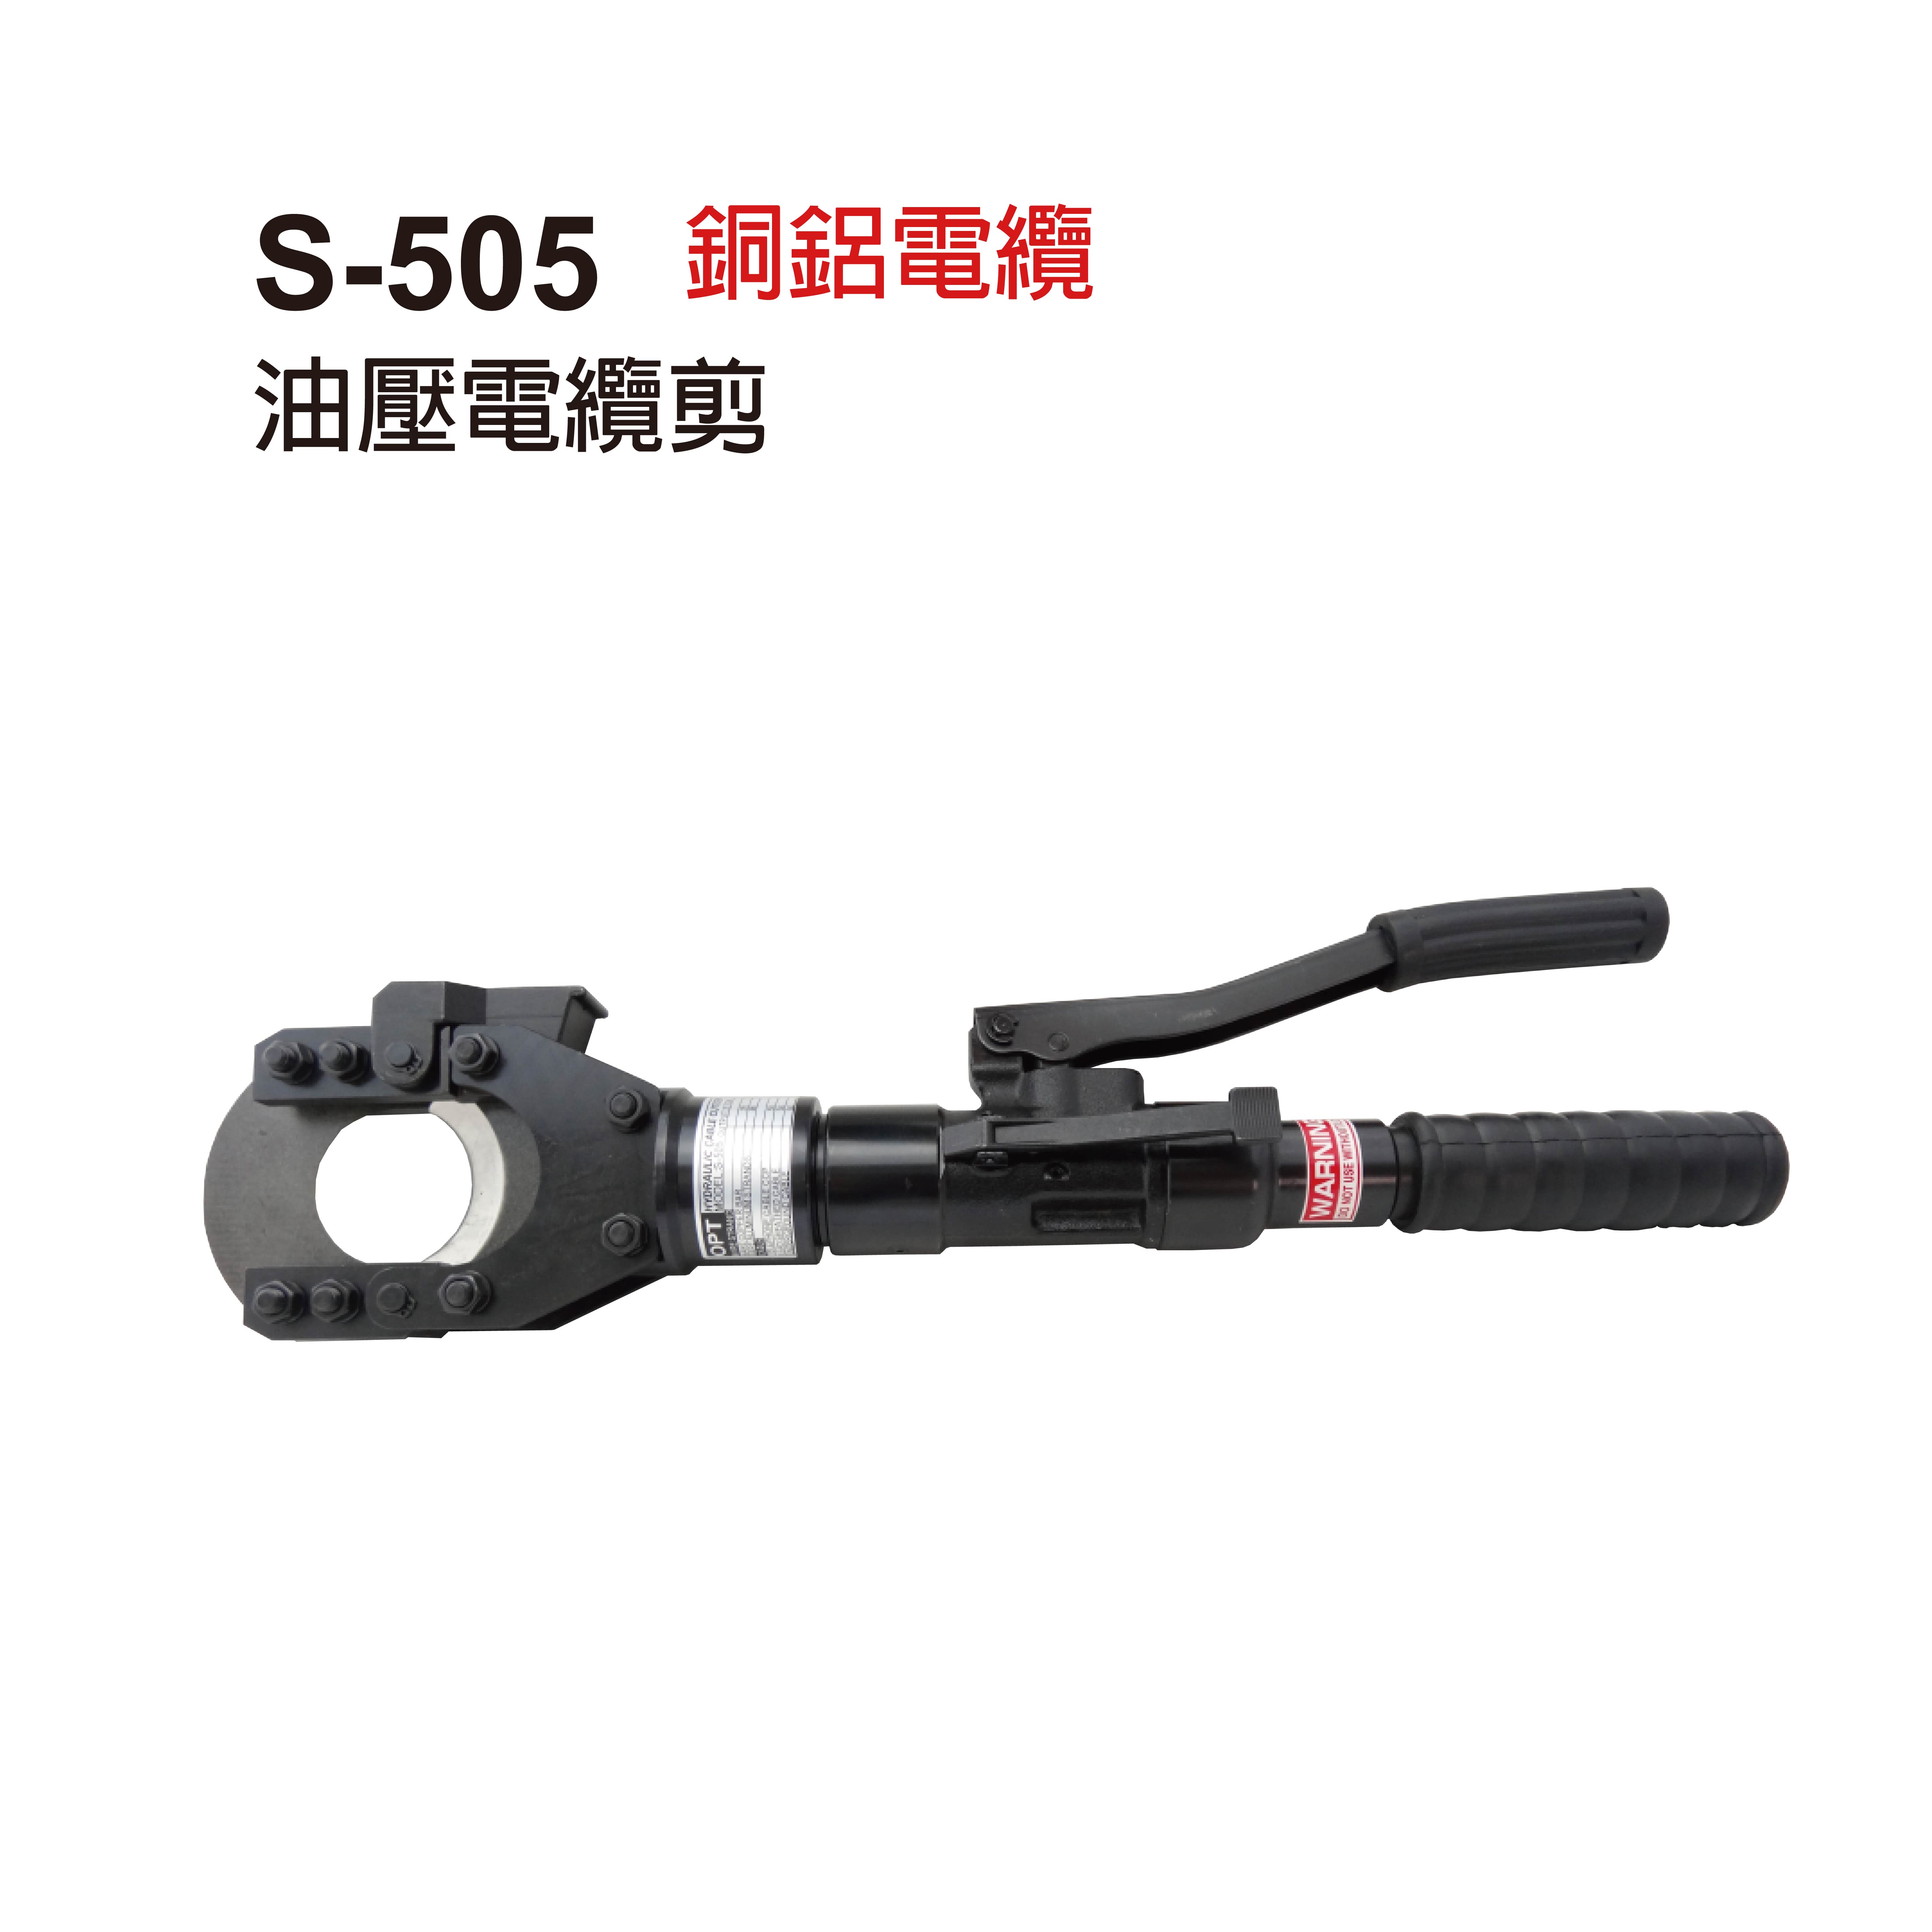 S-505 MANUAL HYDRAULIC CABLE CUTTERS